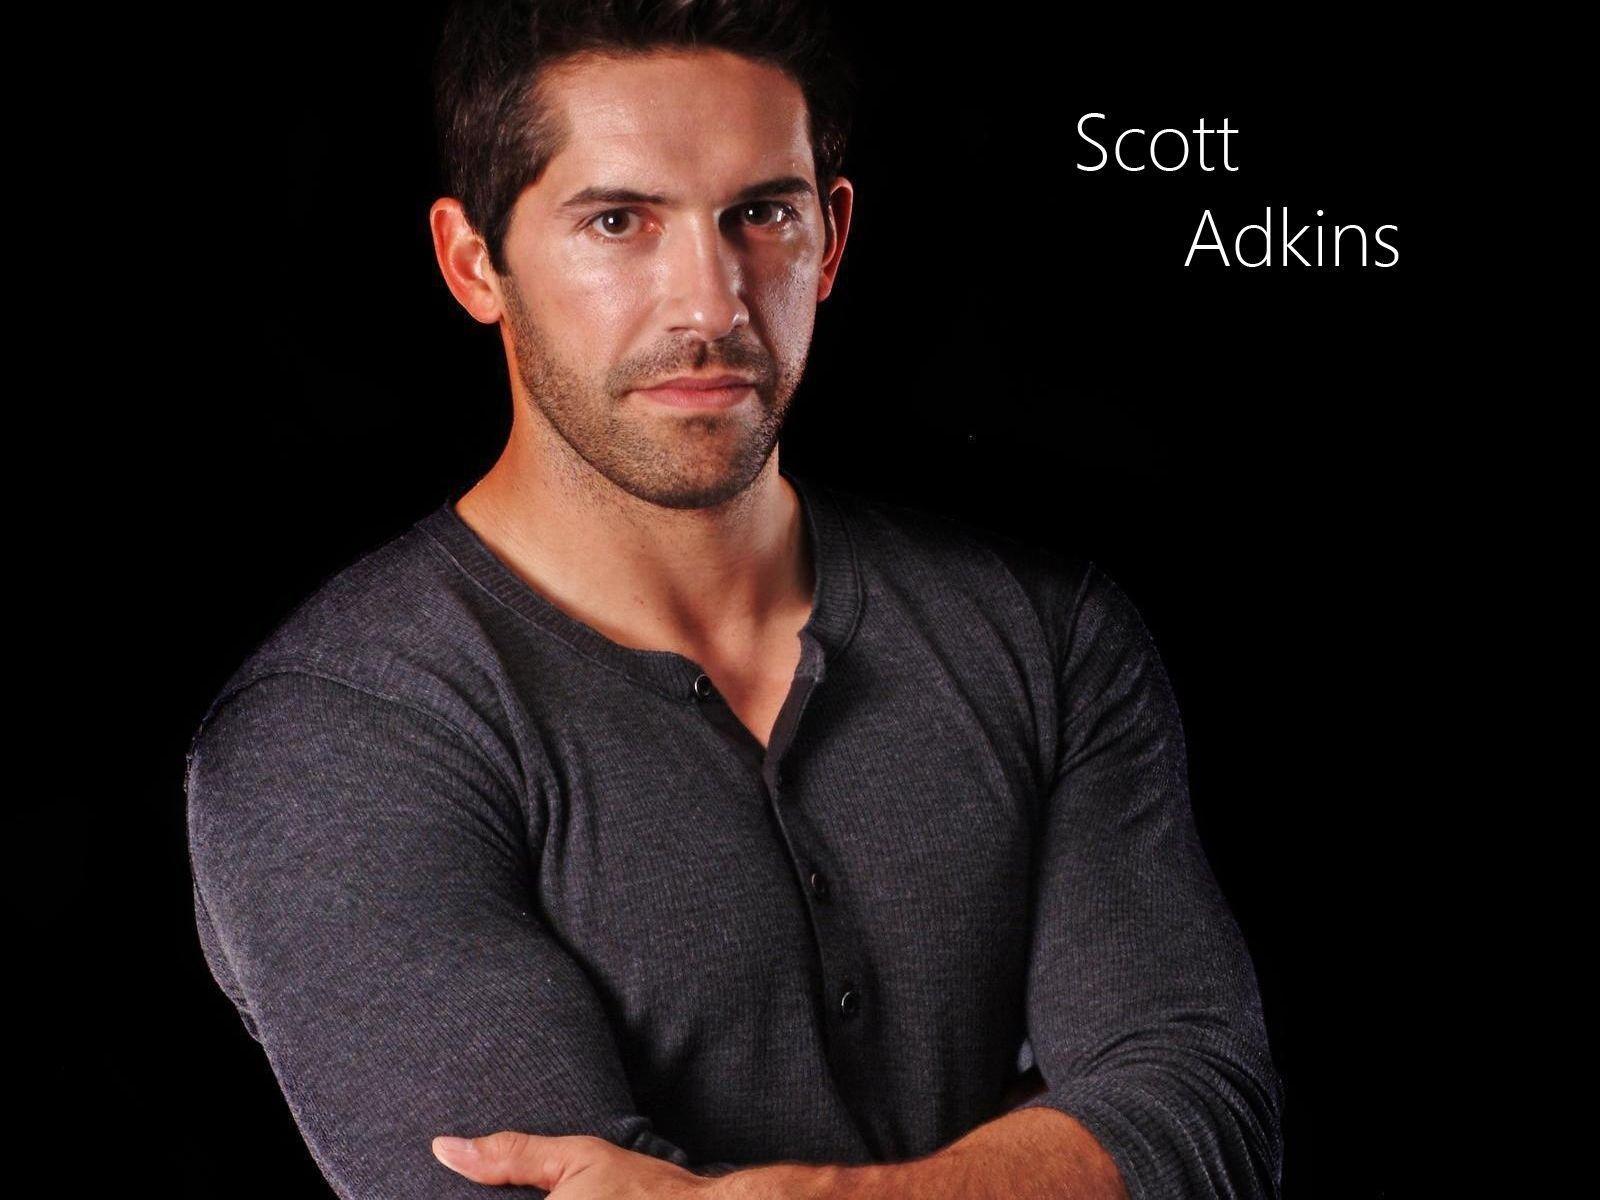 Famous Scott Adkins wallpaper and image, picture